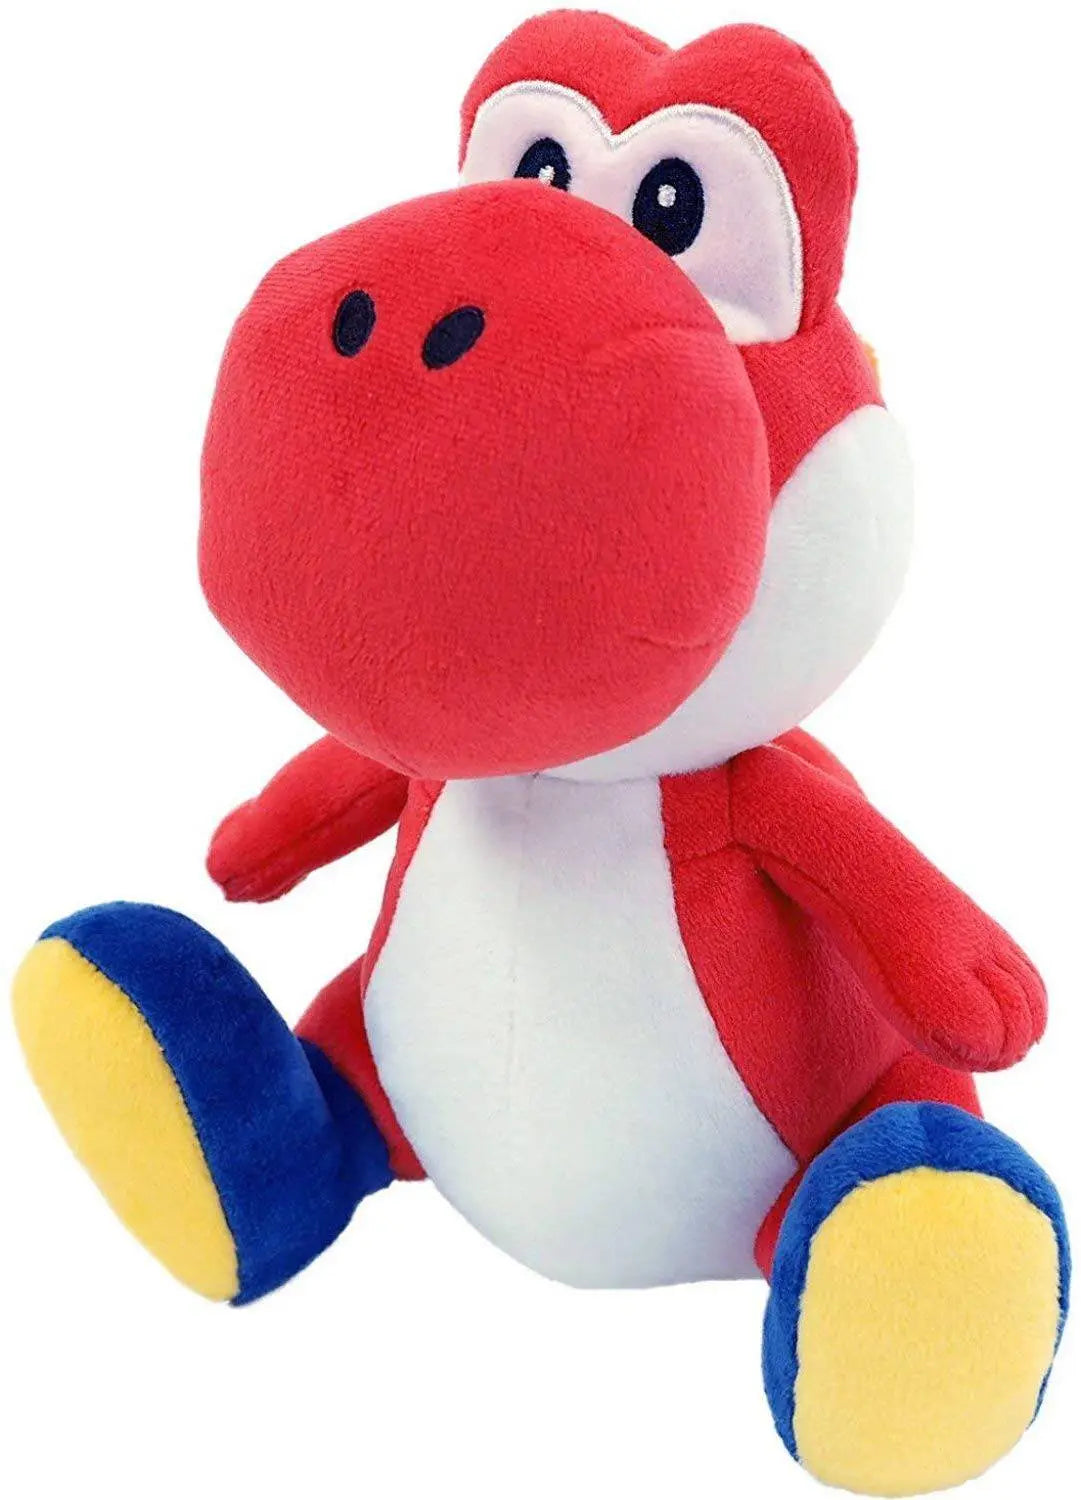 Little Buddy Super Mario All Star Collection Red Yoshi Plush, 6" King Gaming